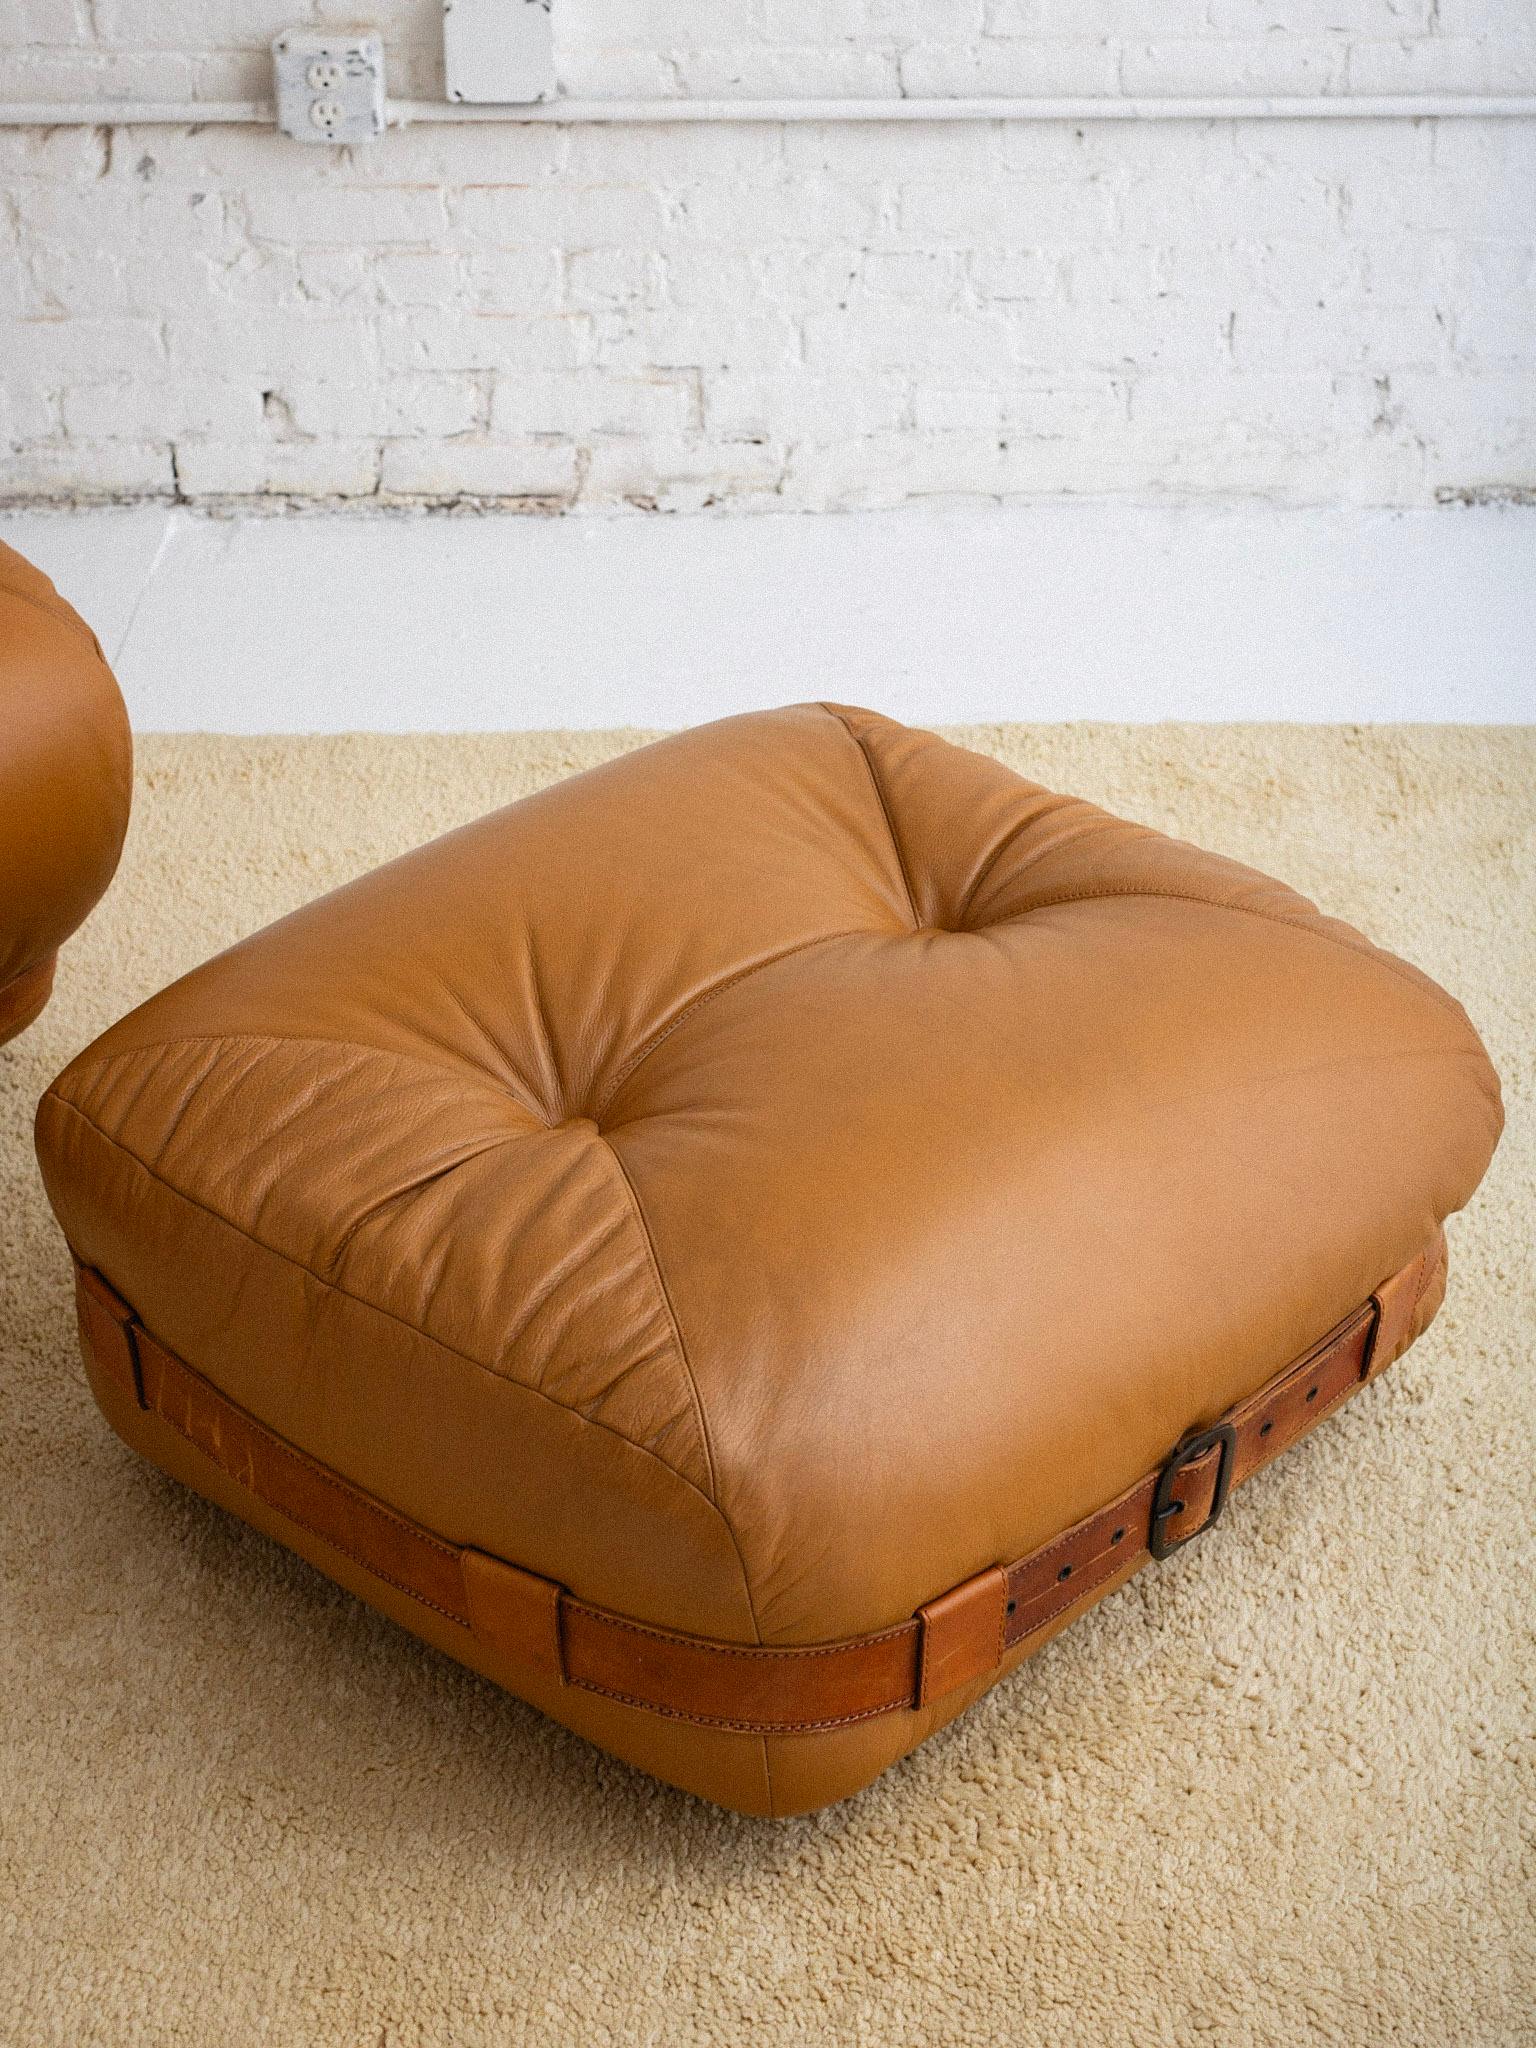 Overstuffed Italian Leather Lounge Chair & Ottoman For Sale 5